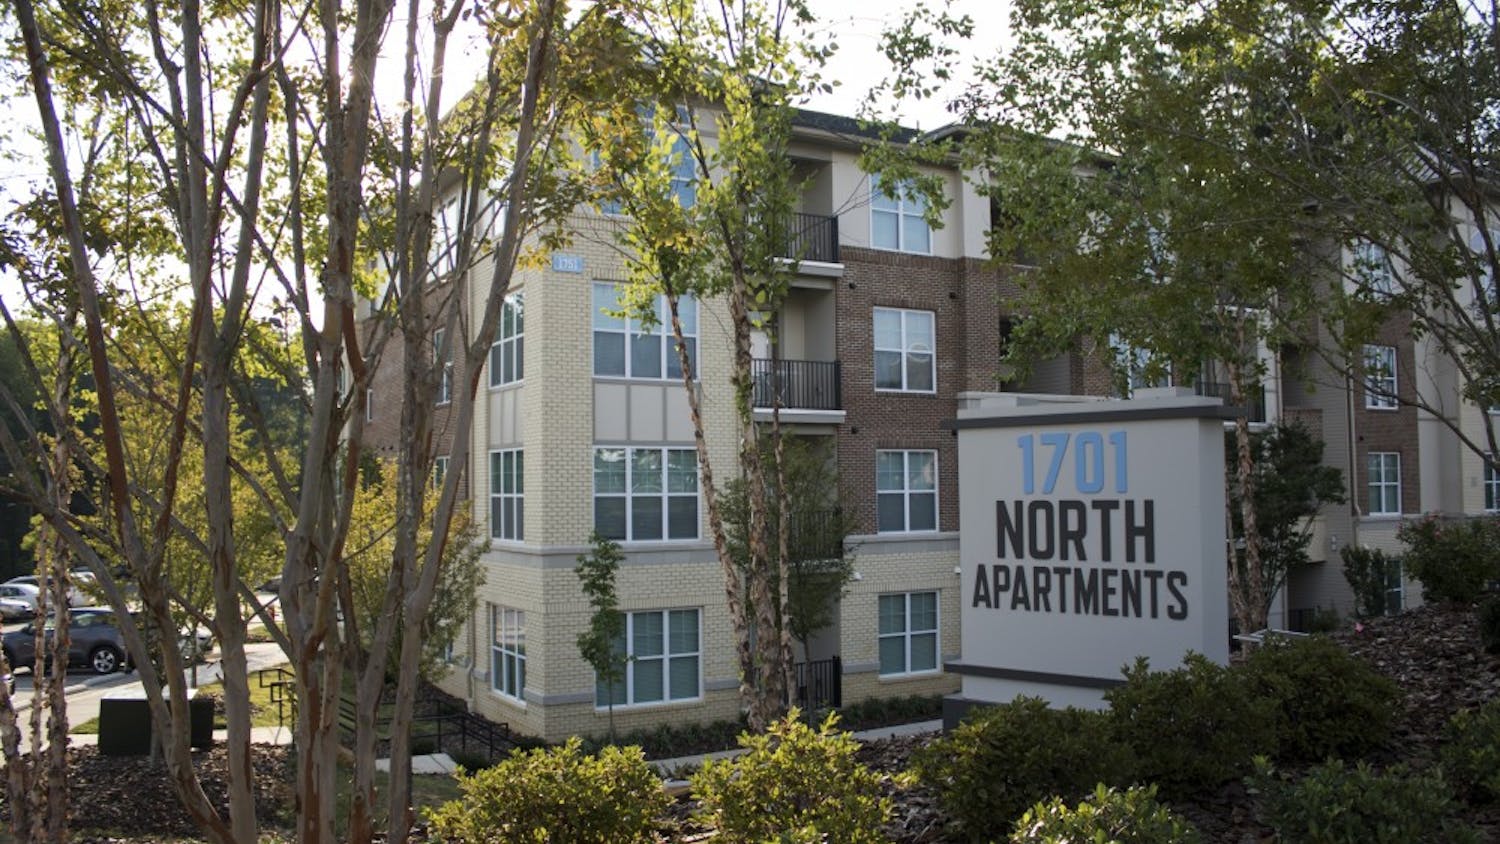 A man was shot in an apartment unit at 1701 North Apartments on Martin Luther King Jr. Blvd in Chapel Hill on July 11. 